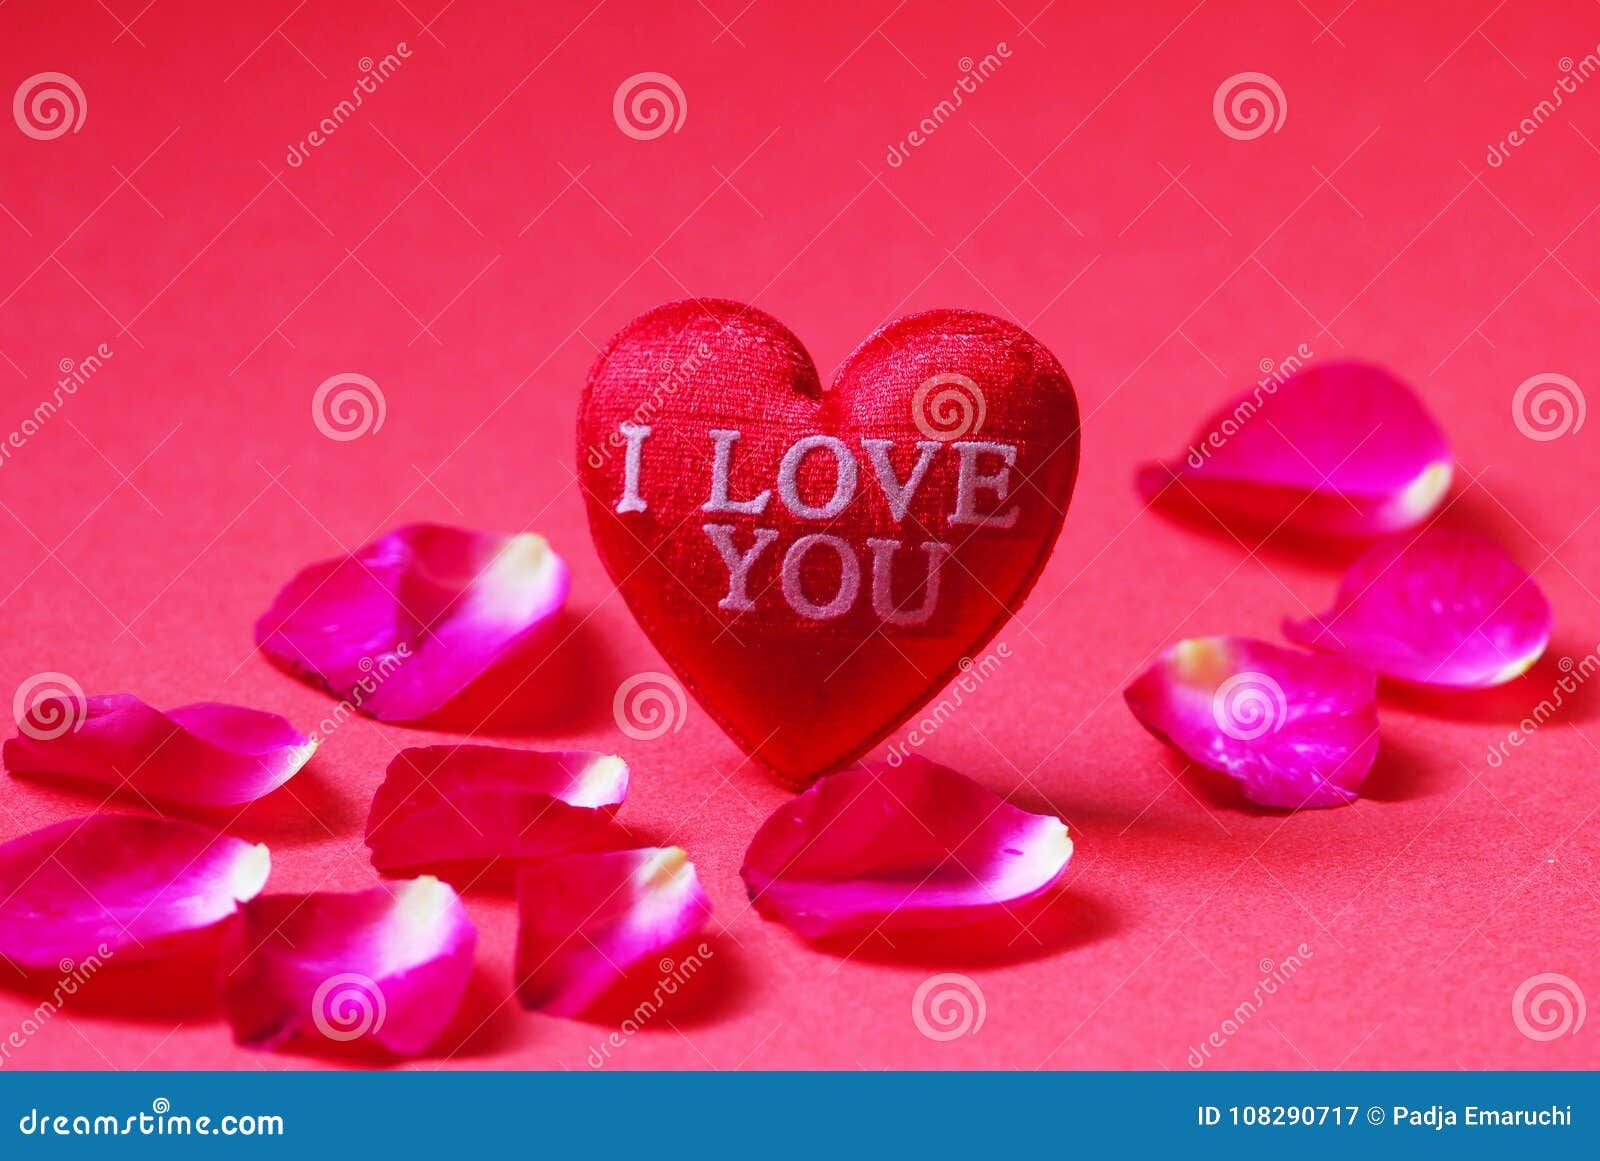 A Red Heart Shaped with I Love You and Rose Petals on Red ...